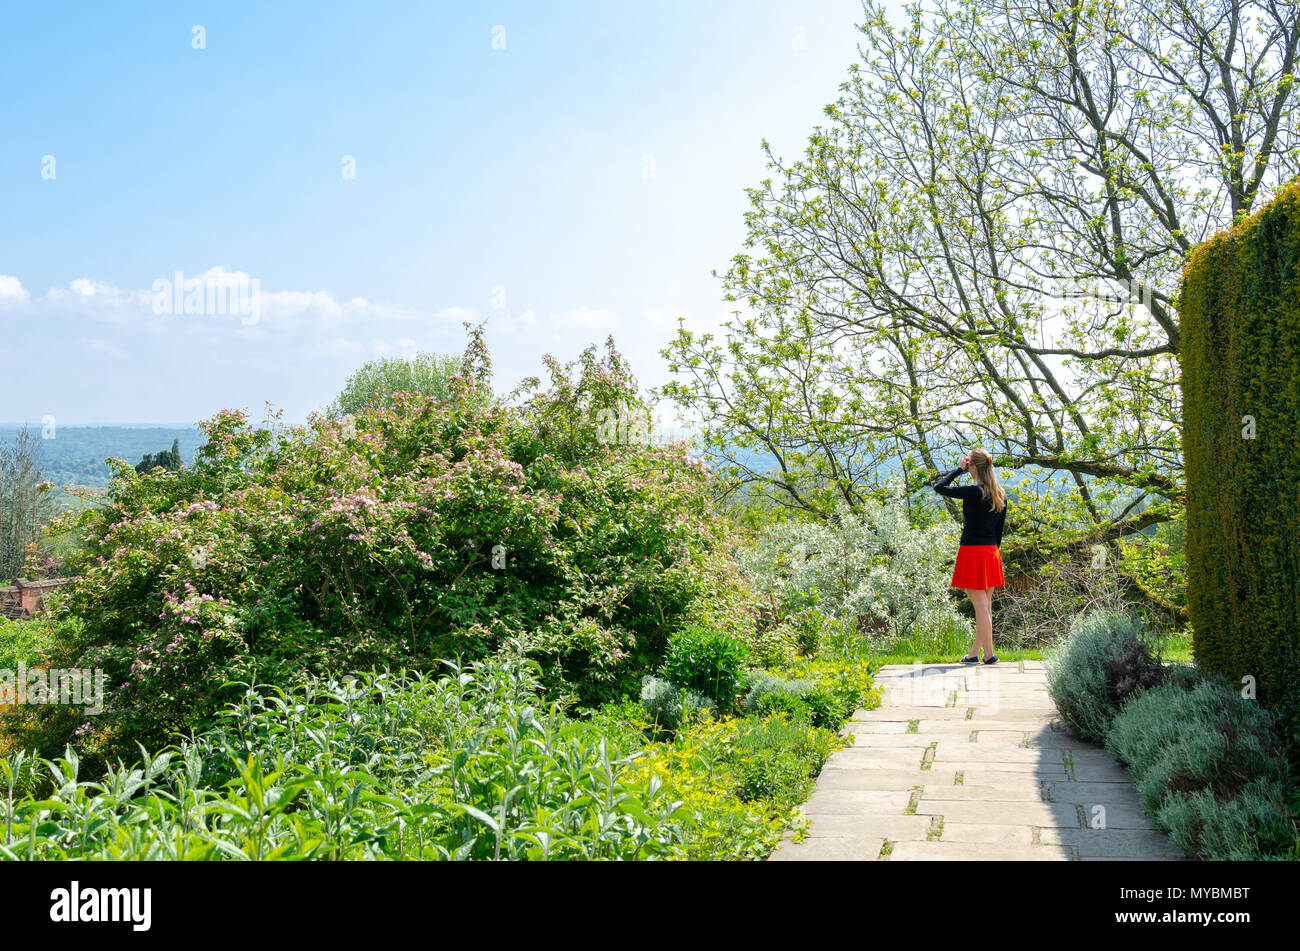 Woman in a red dress surrounded by green plants in a formal garden in springtime/ early summer Stock Photo